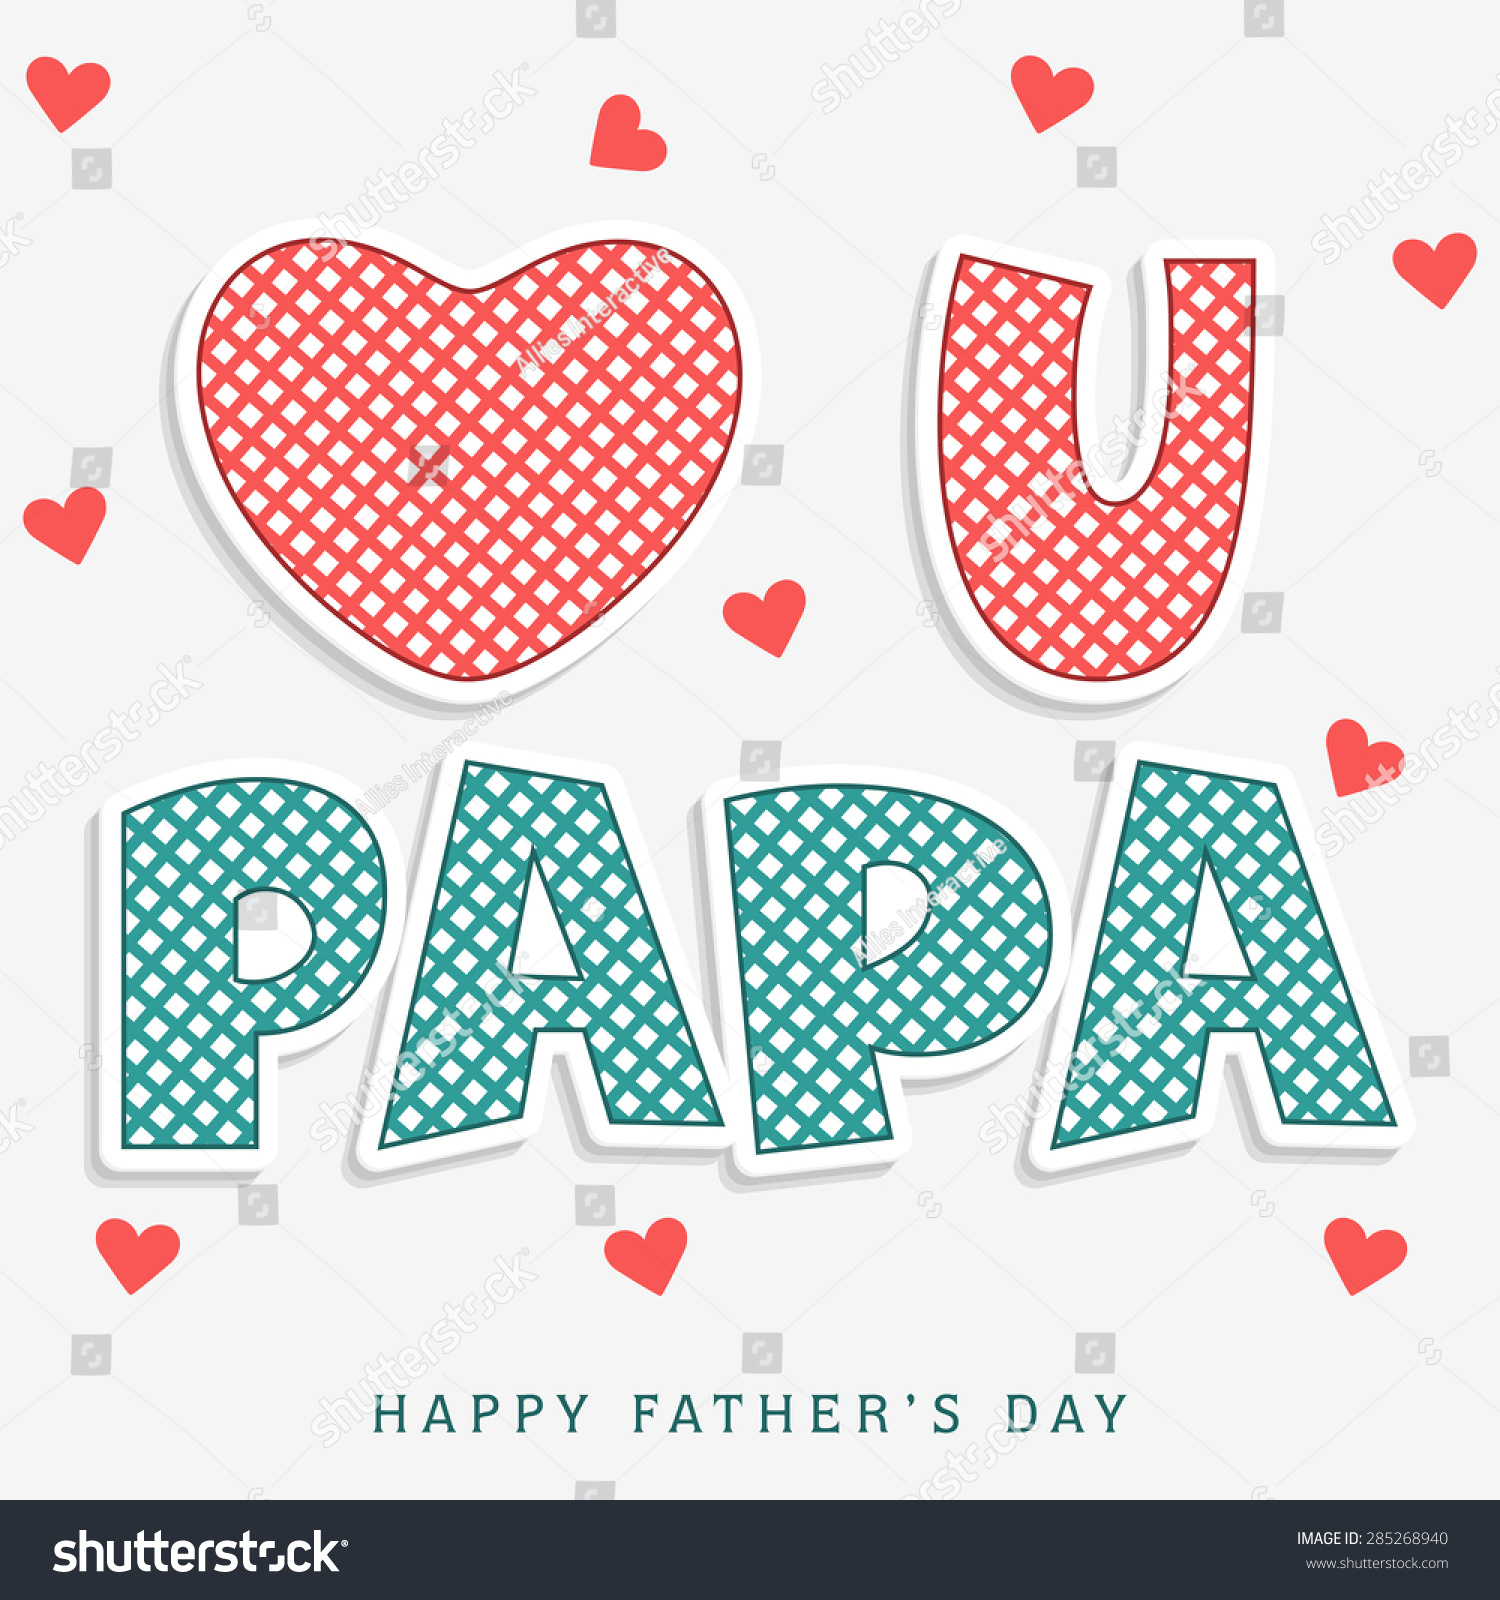 Download Stylish Text Love You Papa On Stock Vector (Royalty Free ...